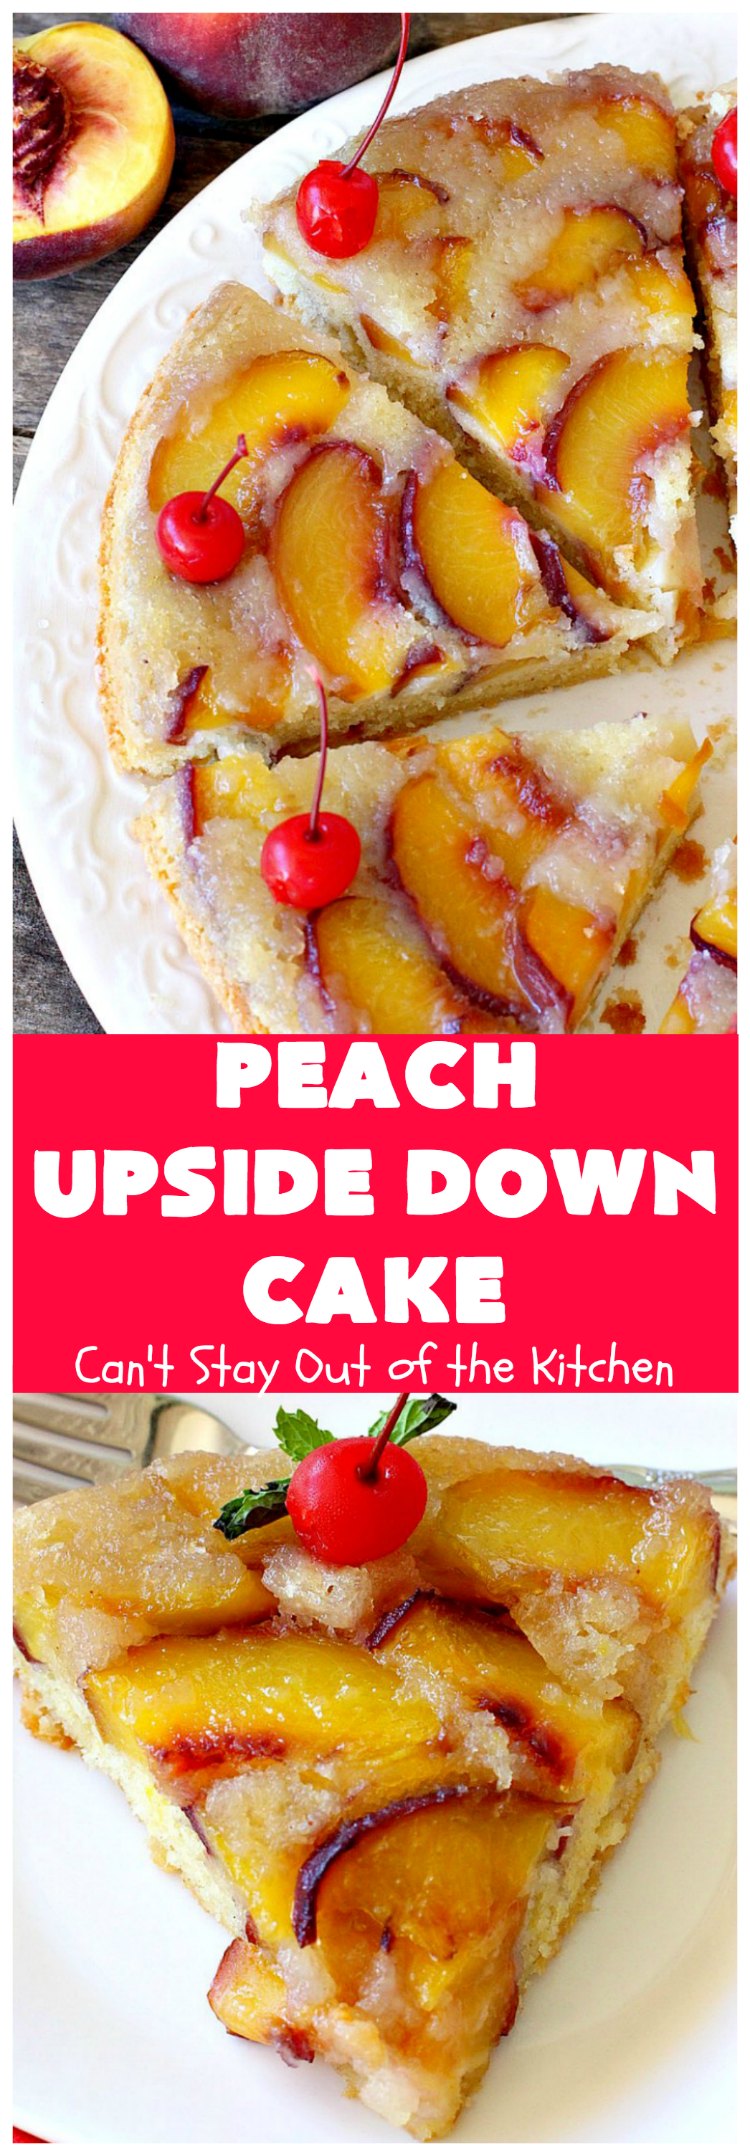 Peach Upside Down Cake | Can't Stay Out of the Kitchen